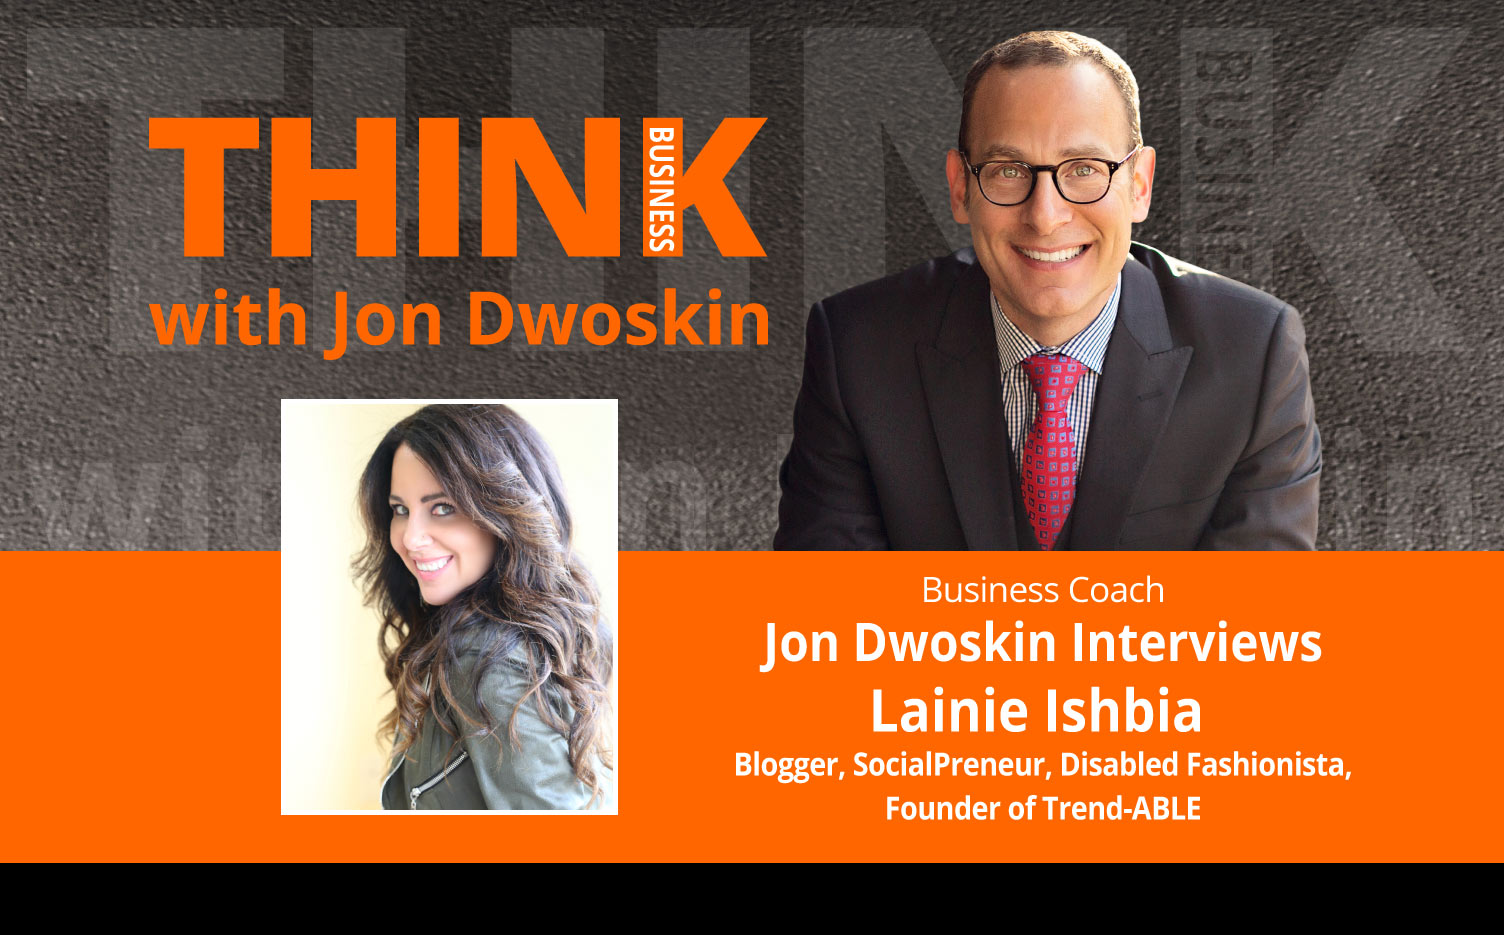 THINK Business Podcast: Jon Dwoskin Interviews Lainie Ishbia, Blogger, SocialPreneur, Disabled Fashionista, Founder of Trend-ABLE